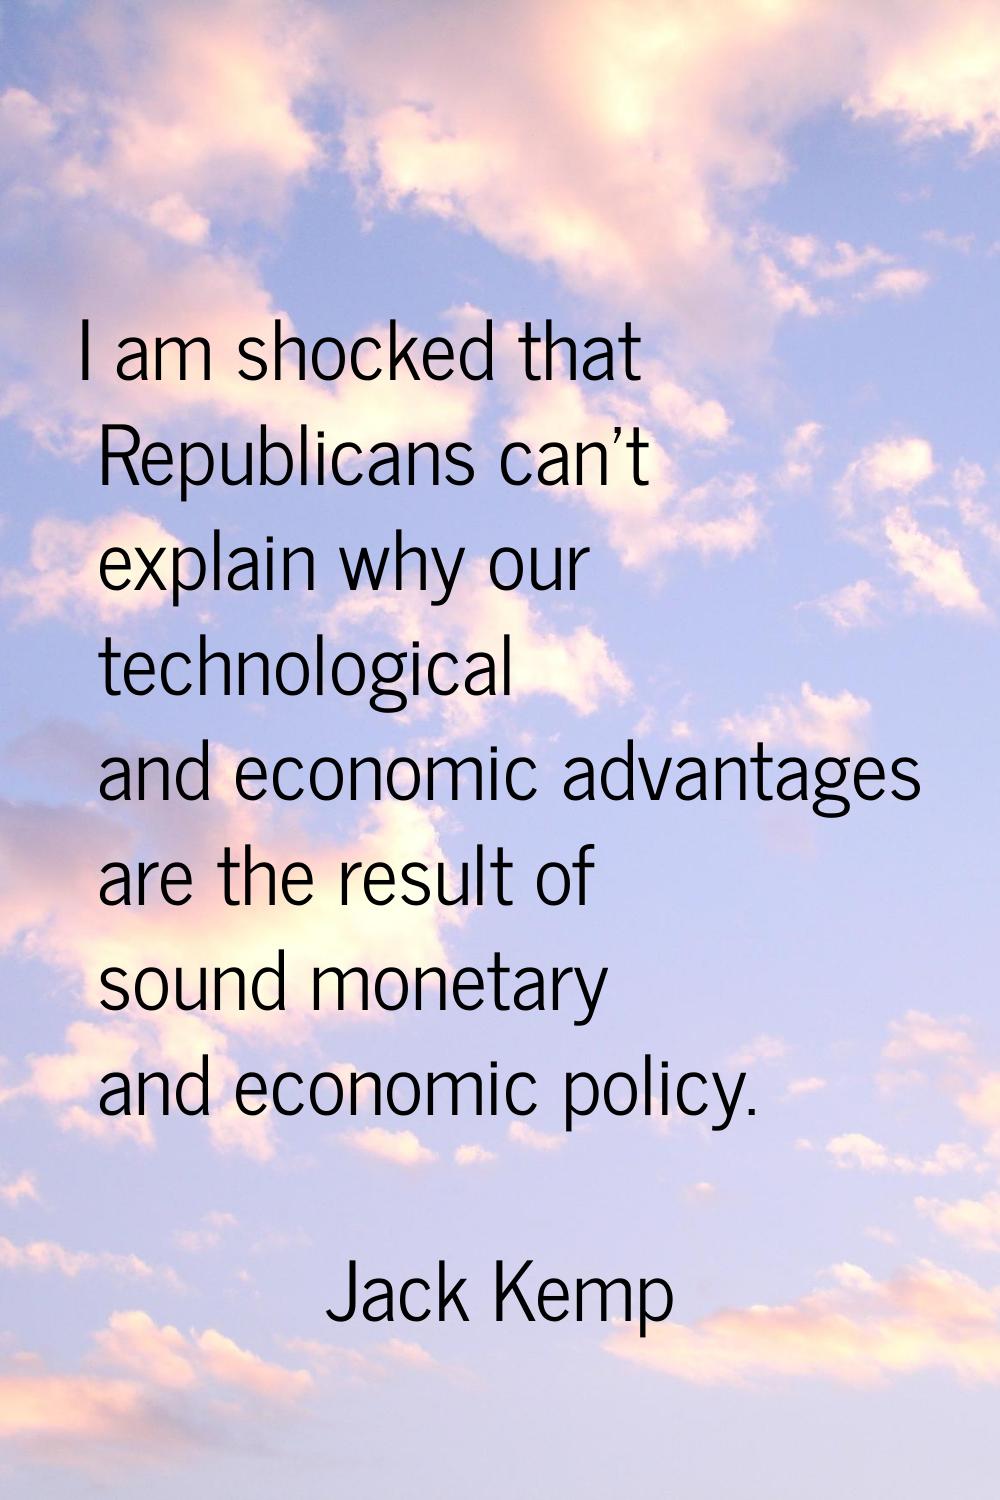 I am shocked that Republicans can't explain why our technological and economic advantages are the r